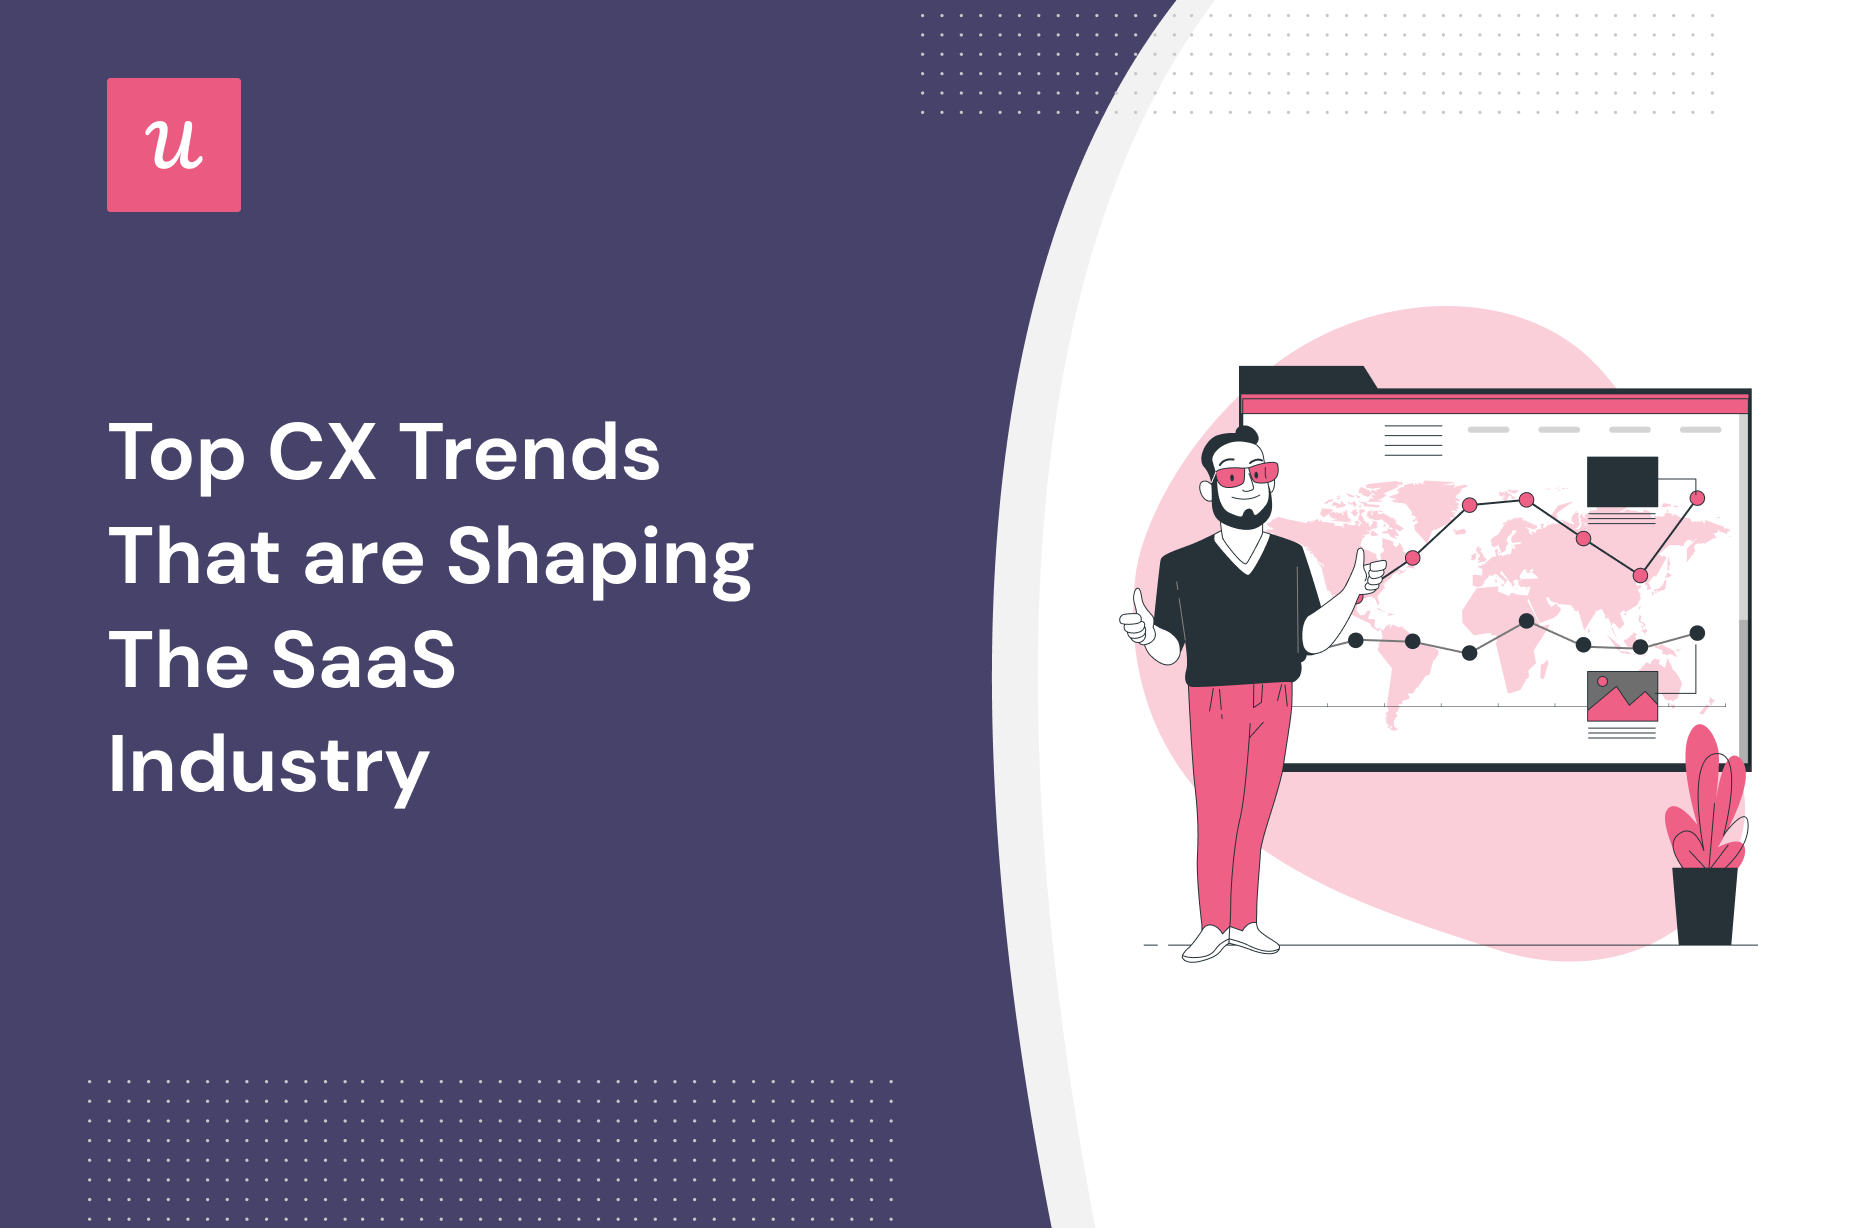 Top CX Trends That Are Shaping the SaaS Industry